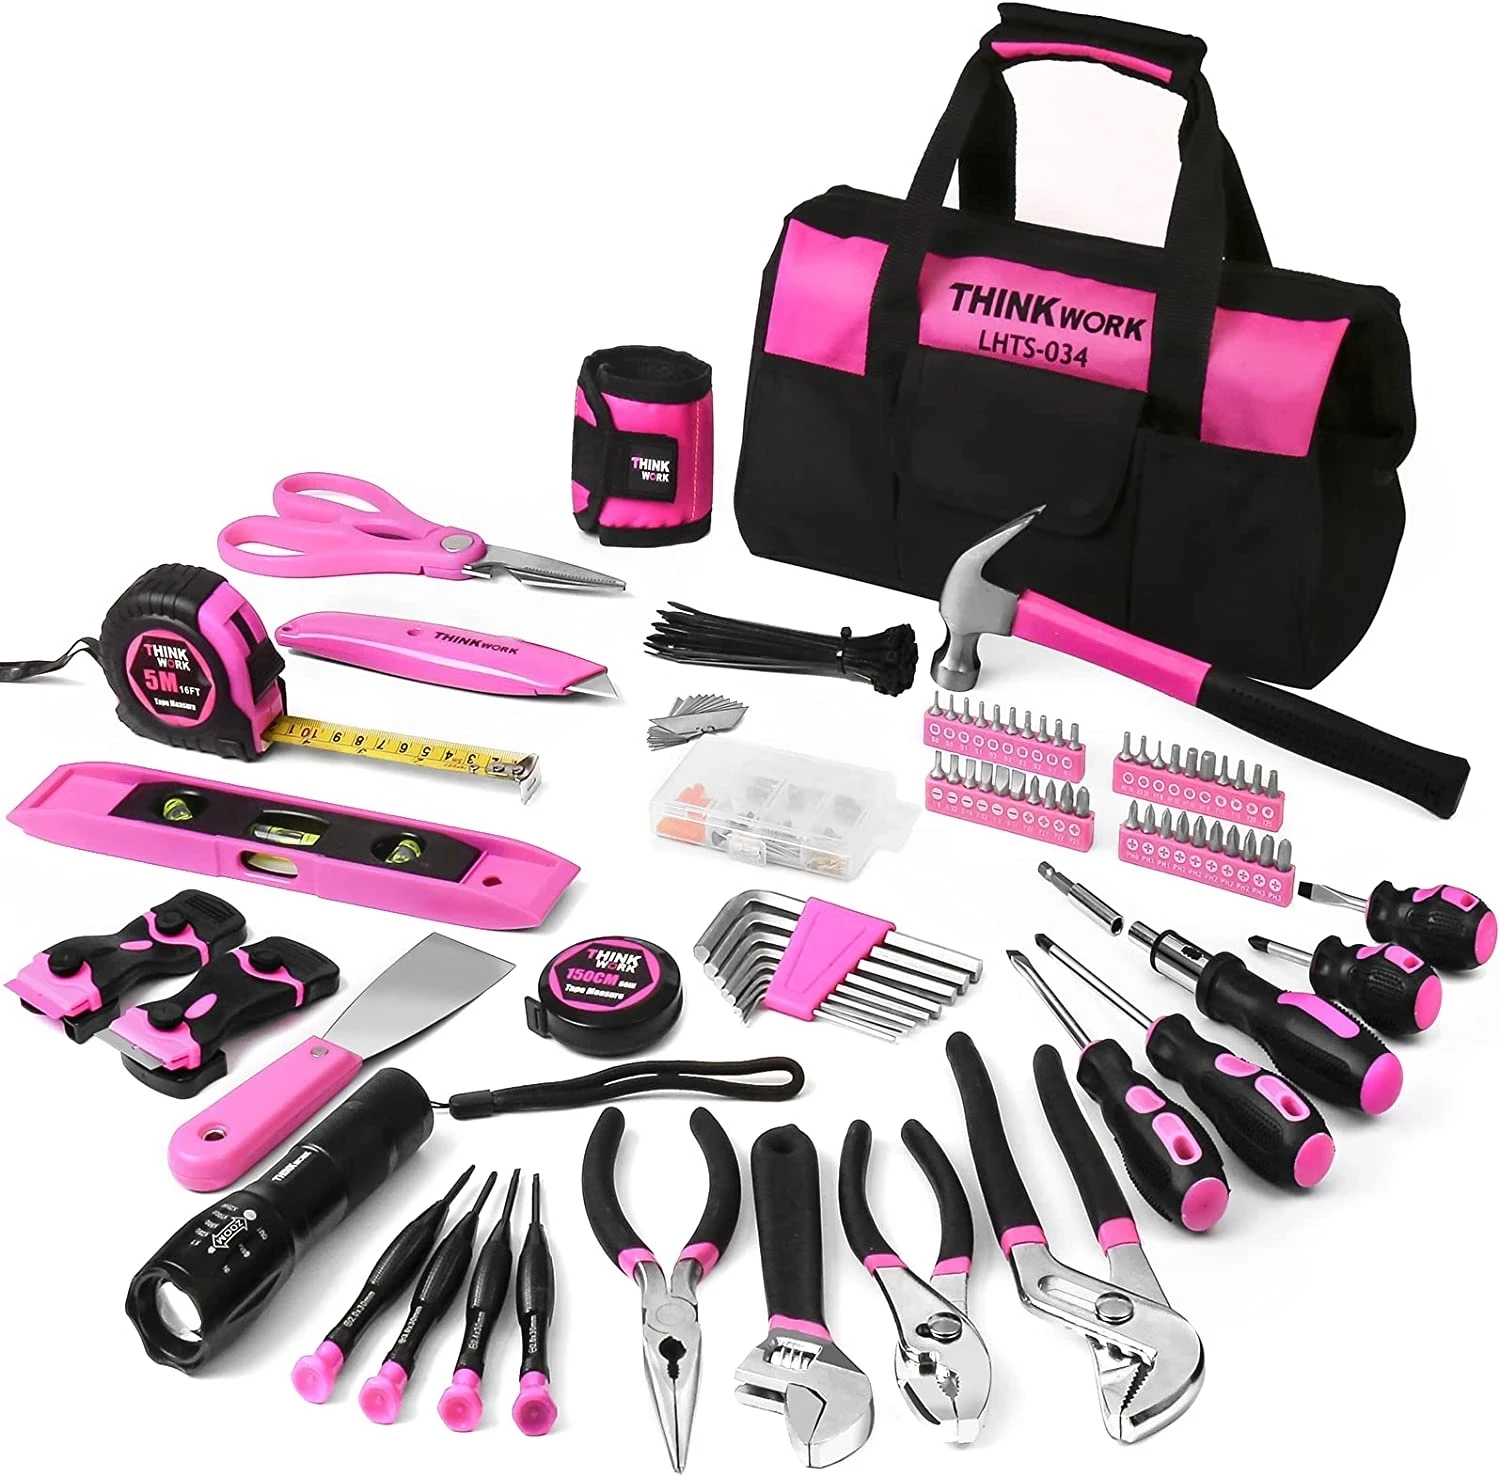 New low price Pink Tool Set - 207 Piece Lady's Portable Home Repairing Tool Kit Tool Bag Perfect for DIY Home Maintenance